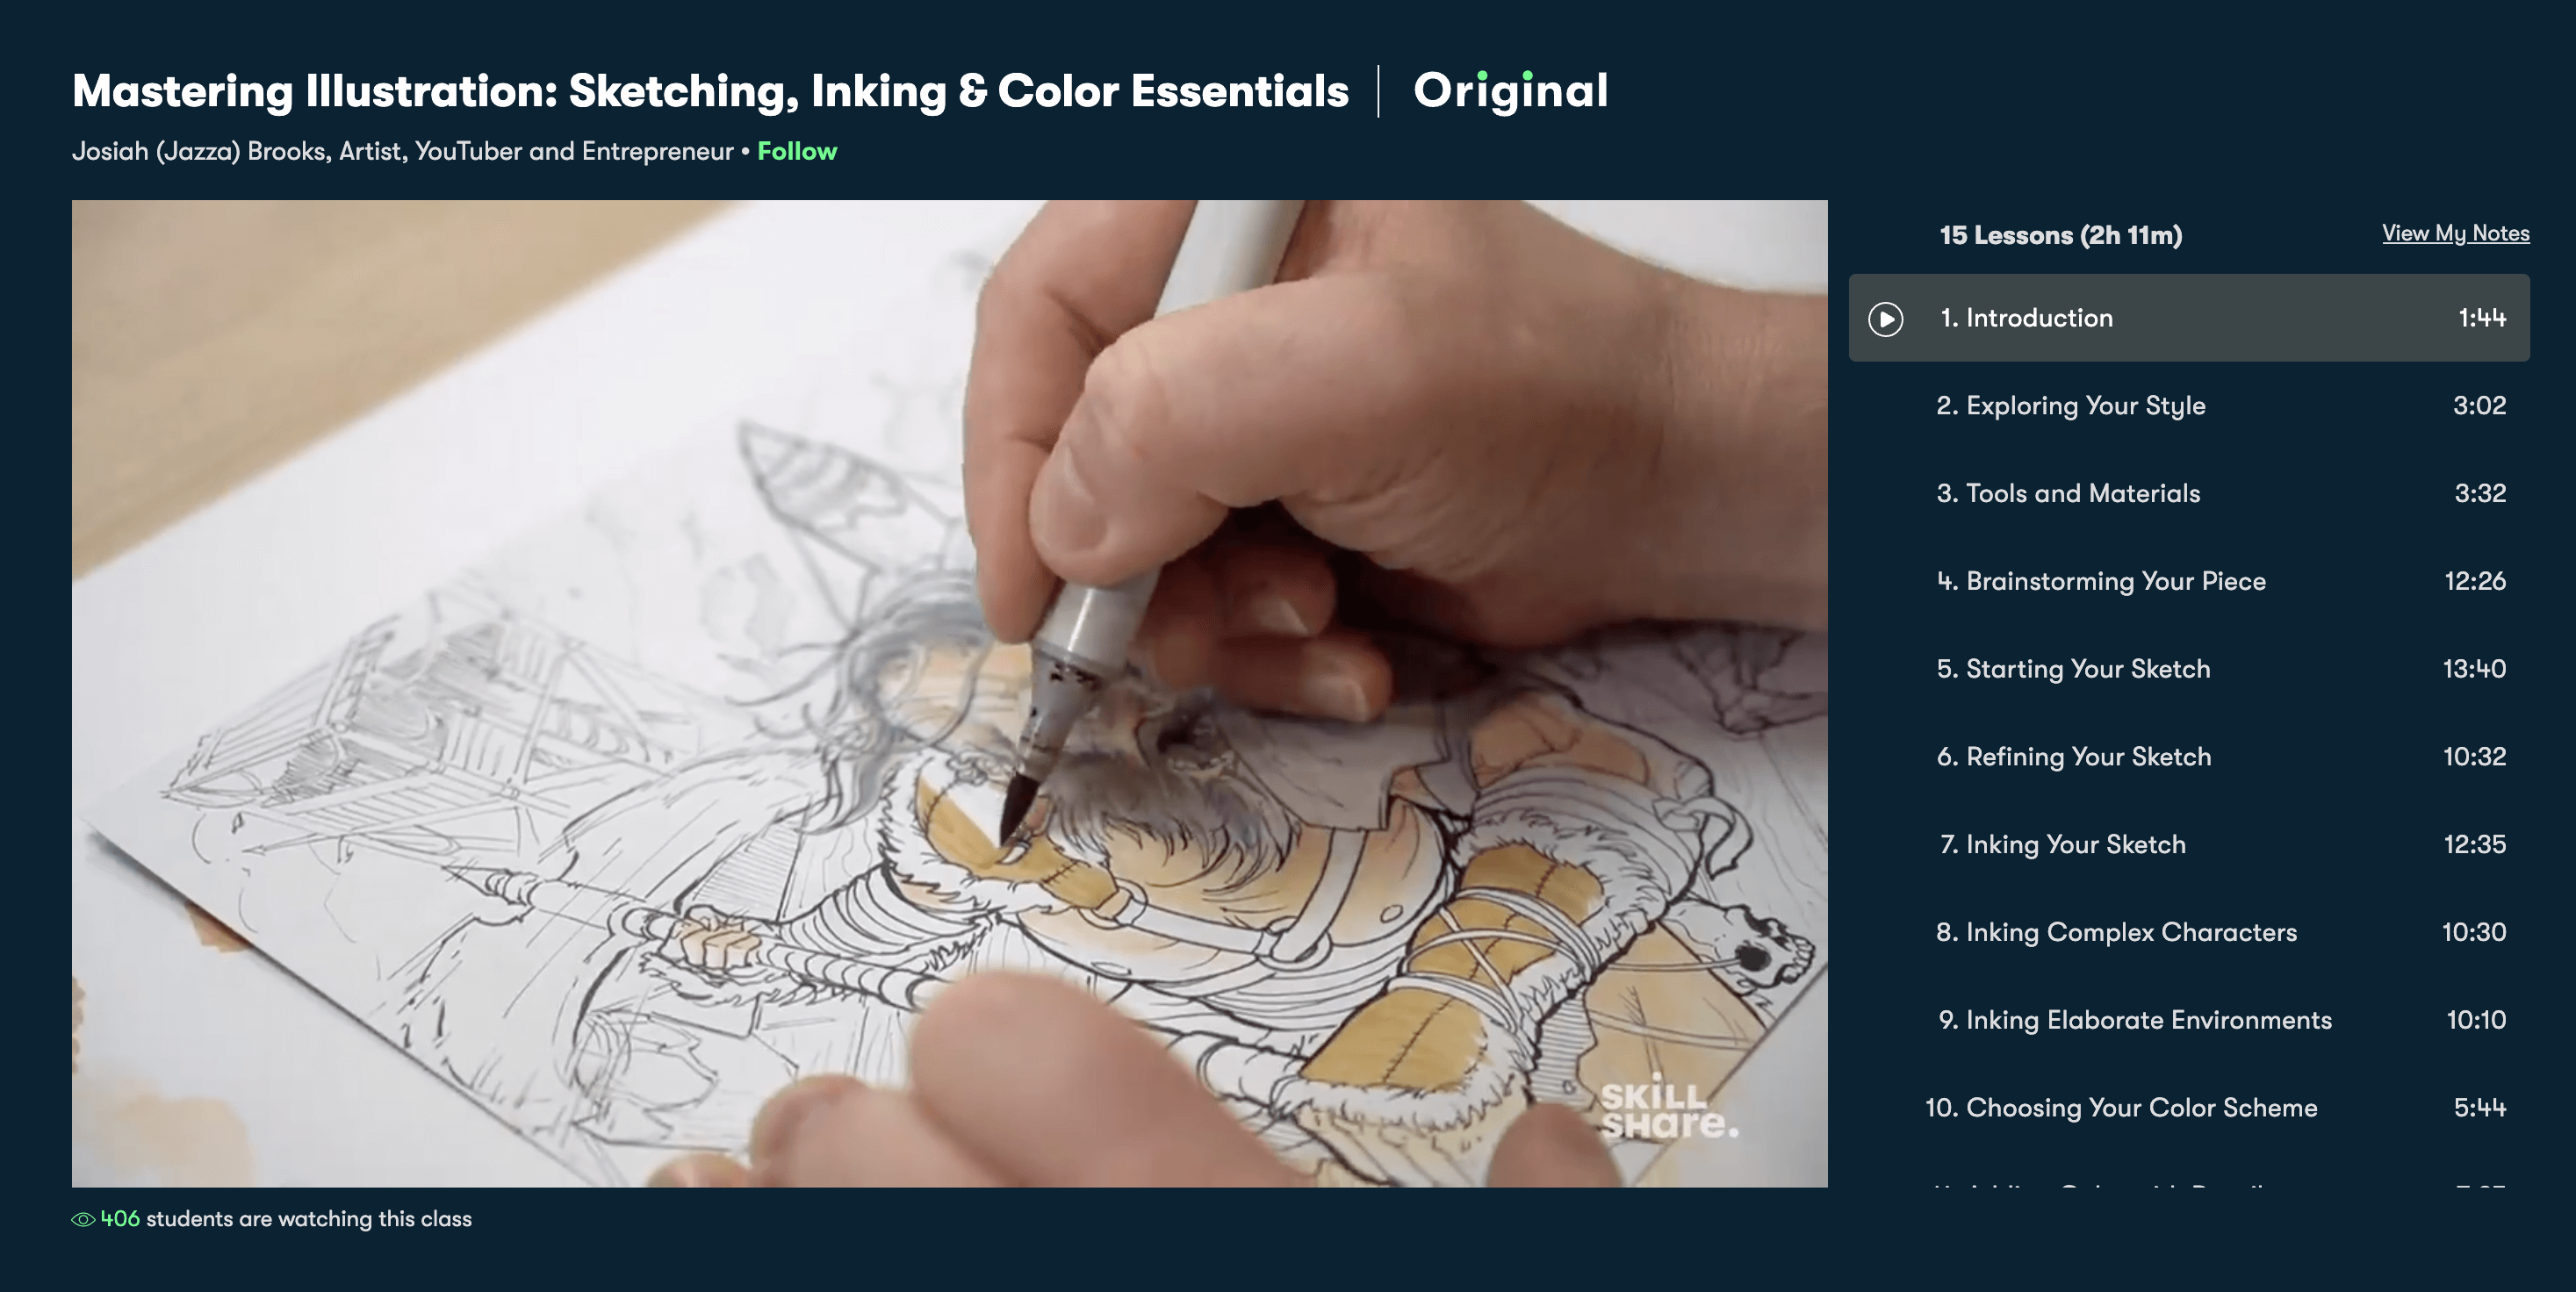 A still from the Skillshare course 'Mastering Illustration: Sketching, Inking & Color Essentials'